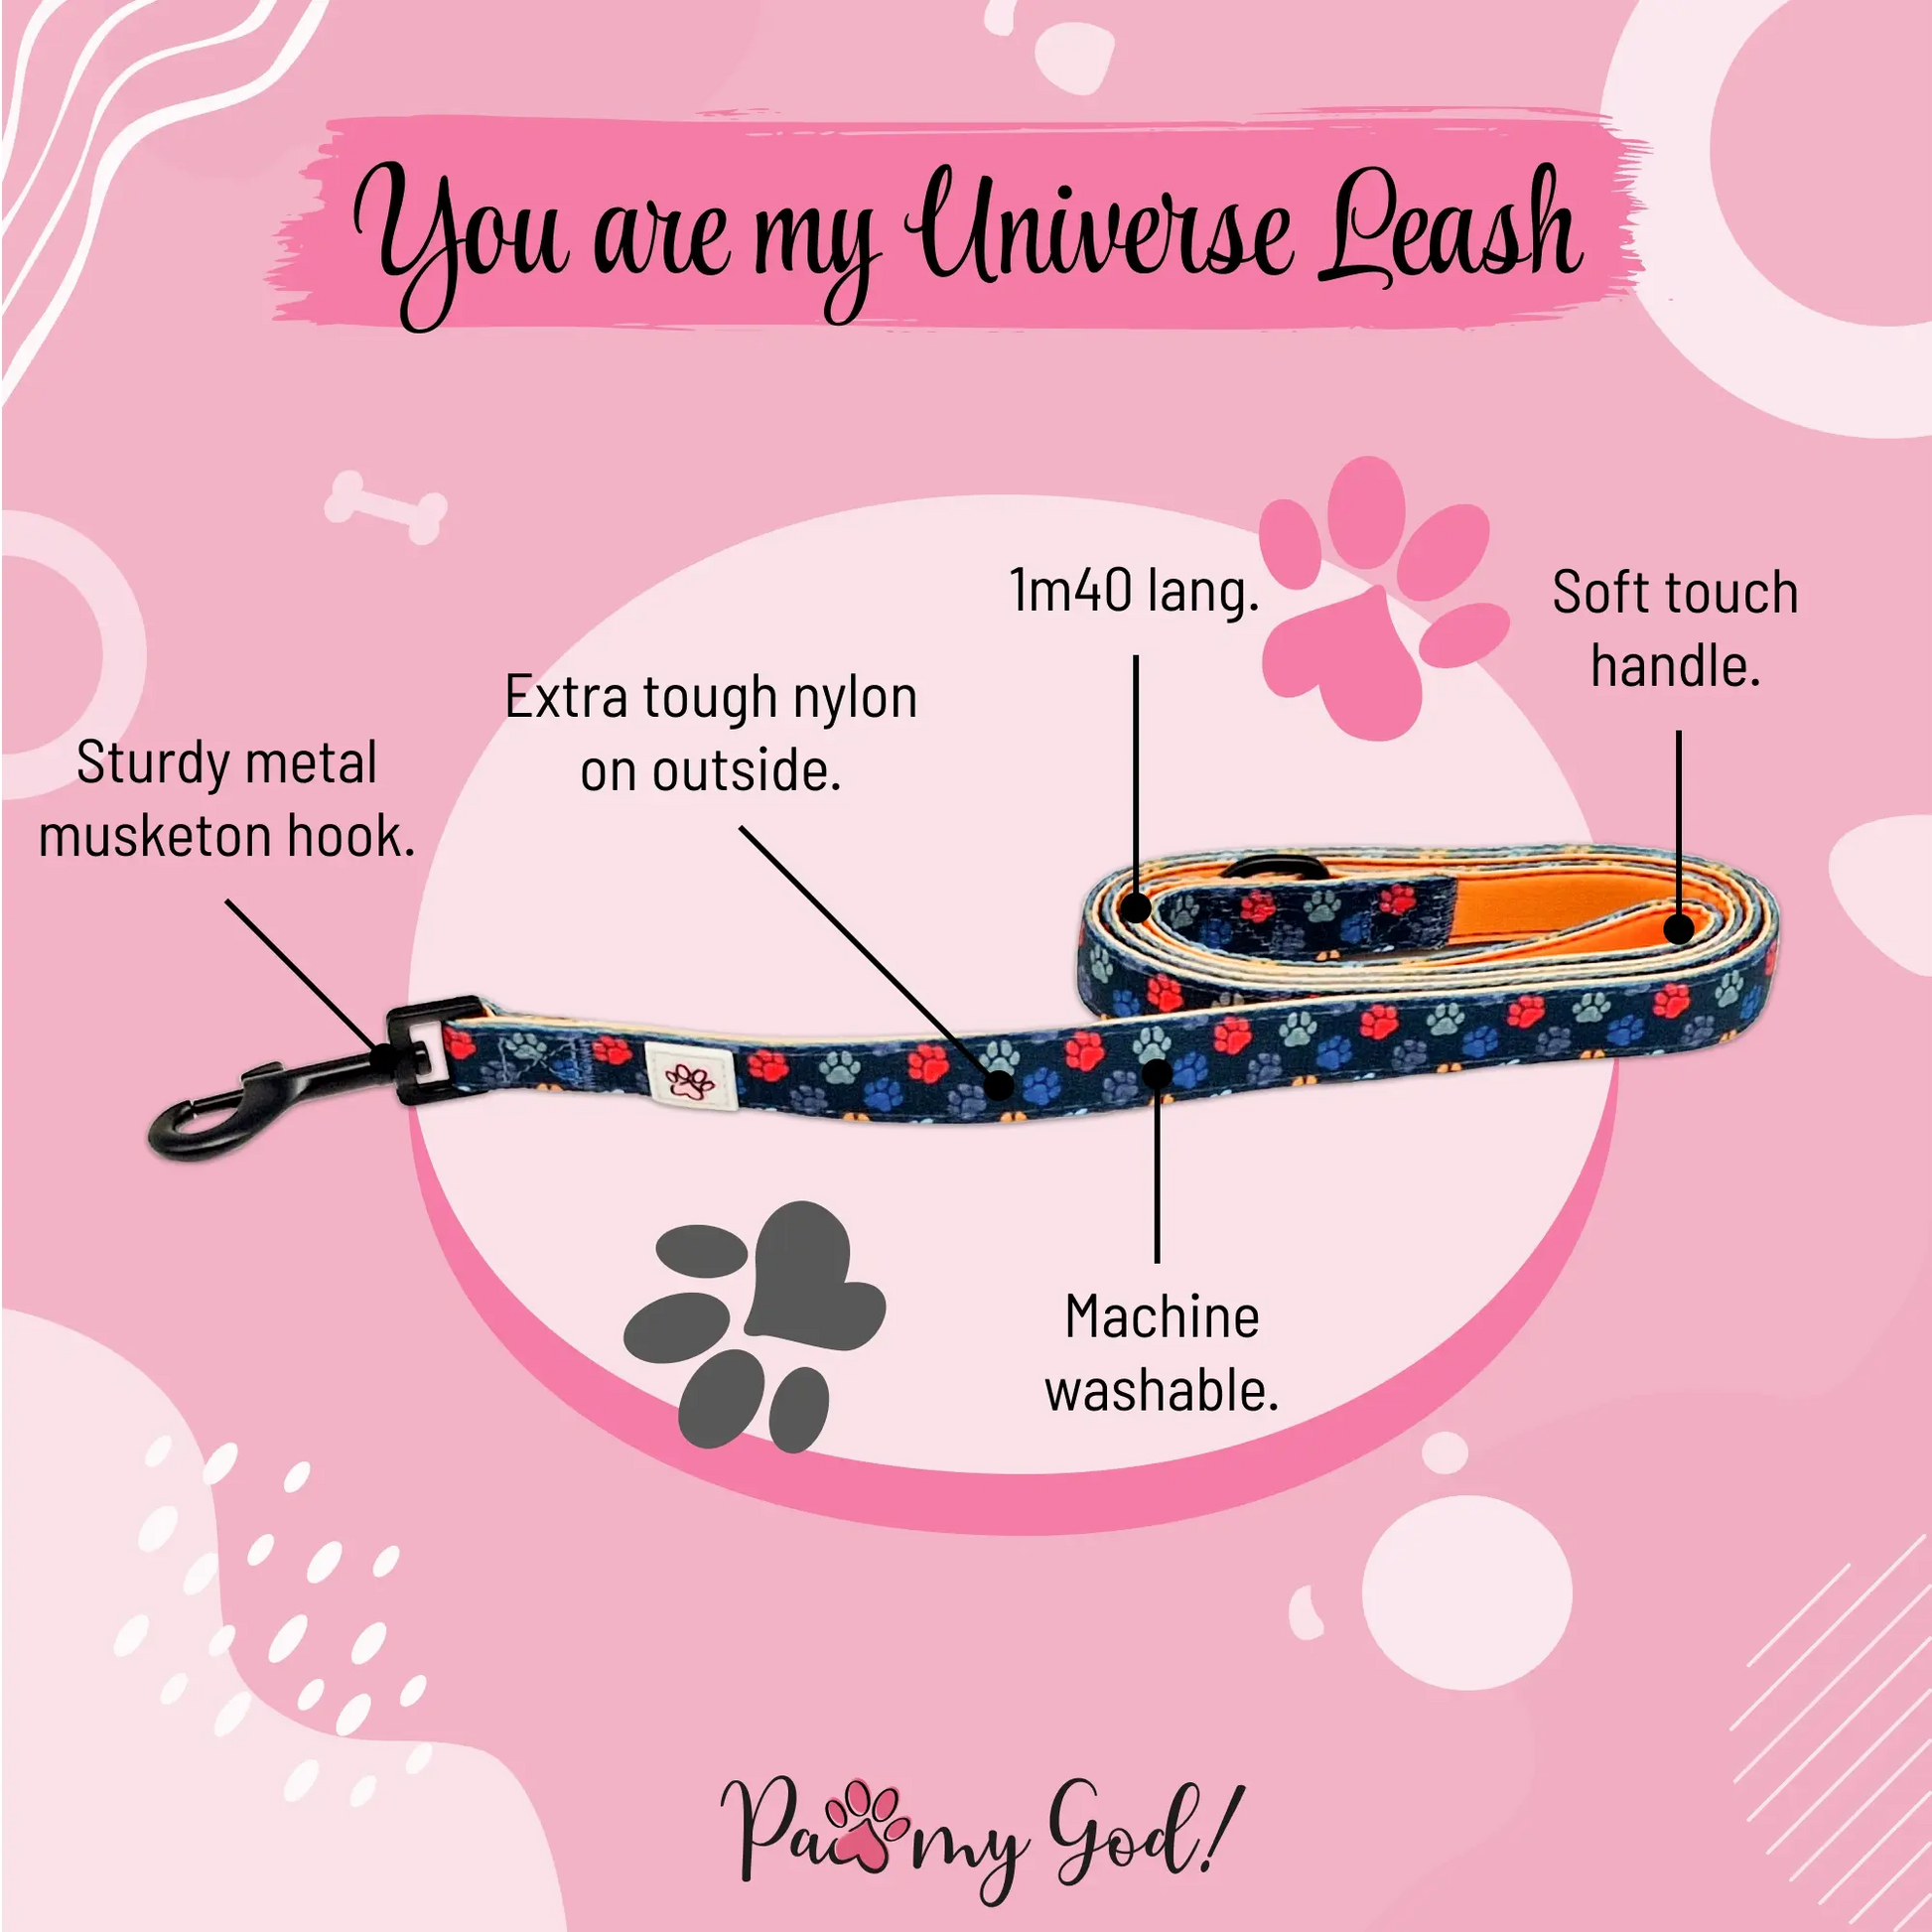 You are my Universe Cloth Leash Features